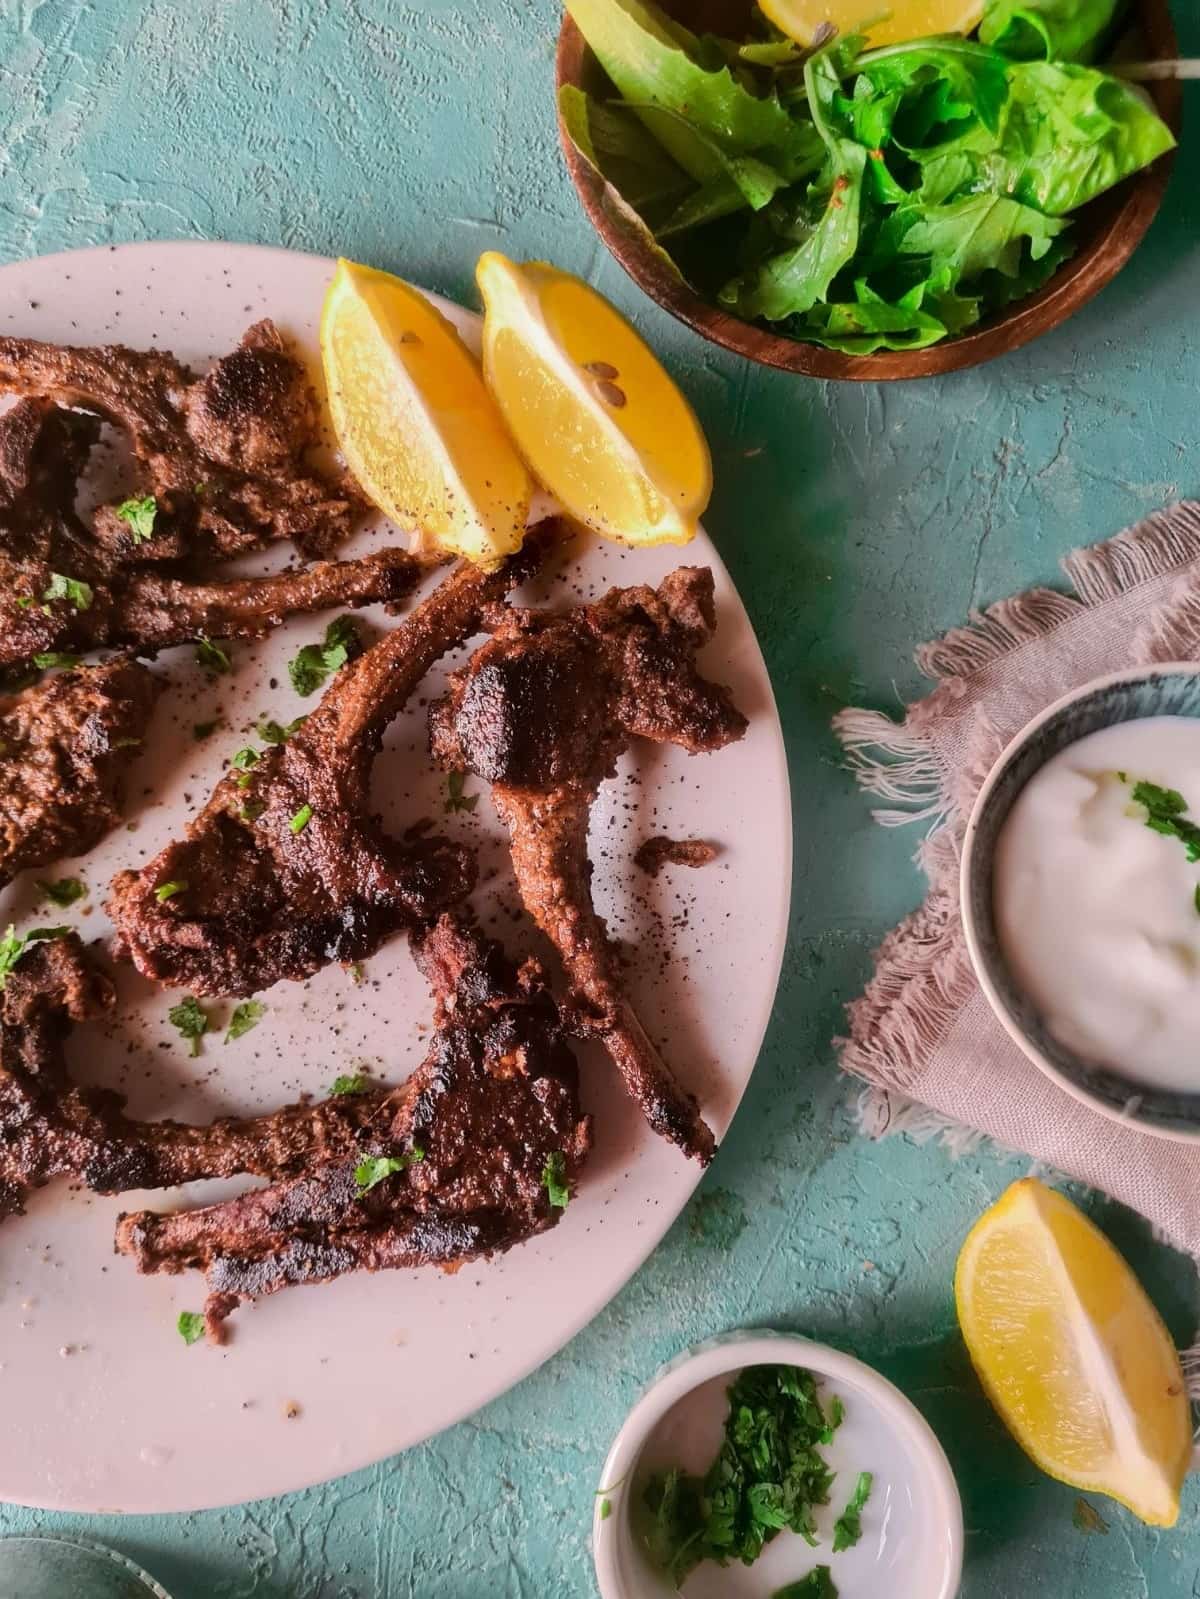 Grilled and steamed mutton chops ready on a white plate with lemon slices on the side and a bowl with yogurt.